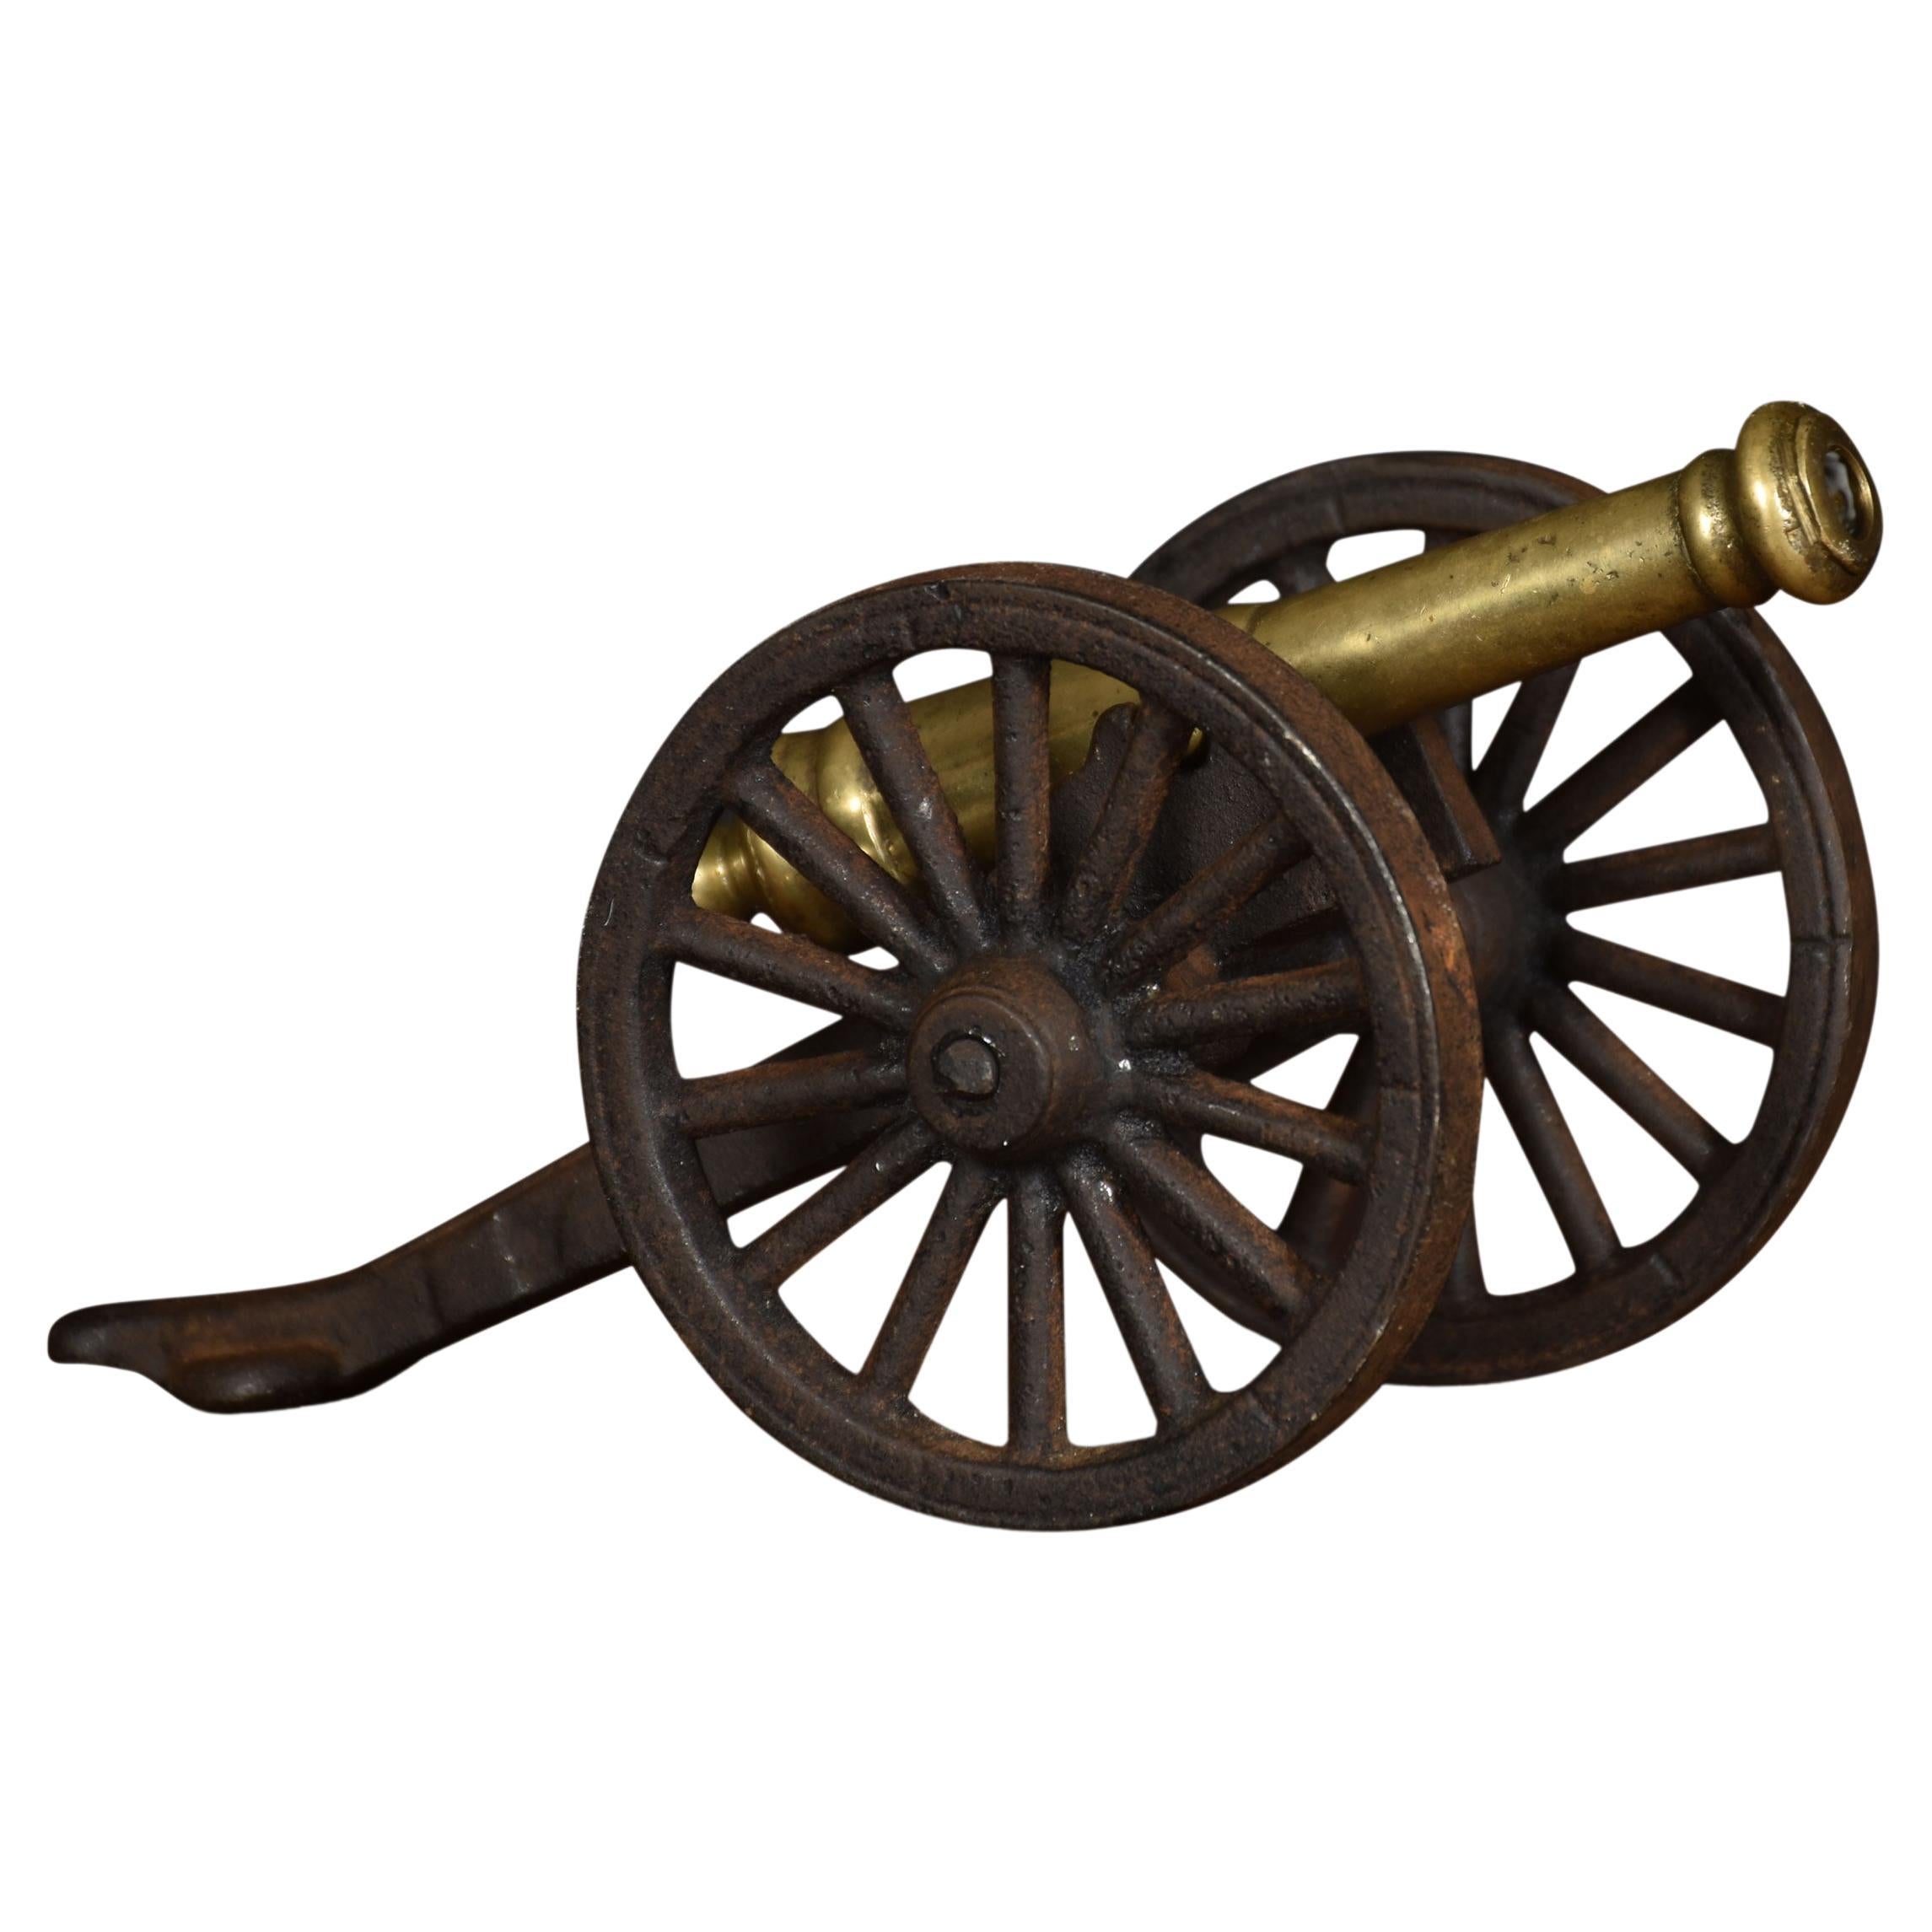 Brass Model of a Signal Cannon